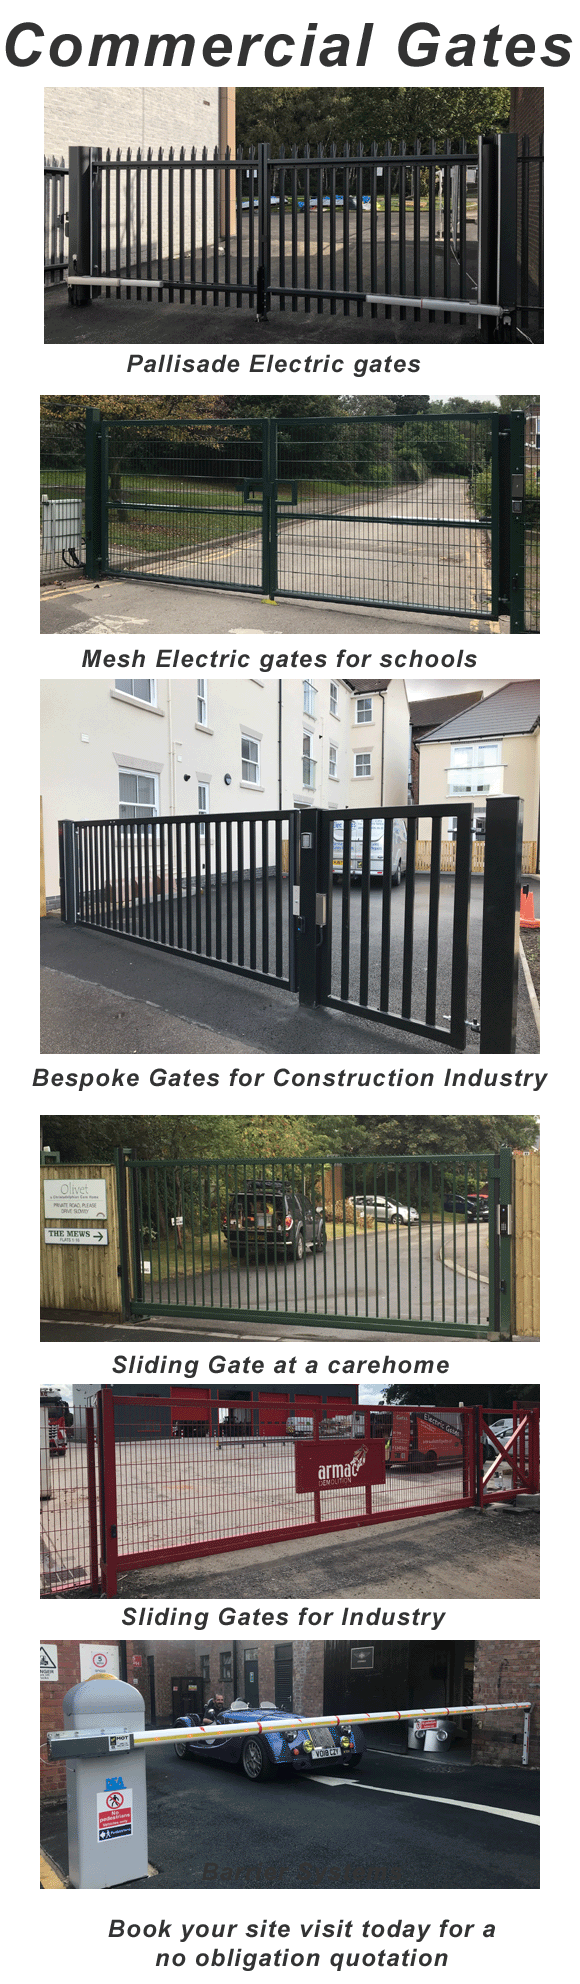 An image of different types of commercial gates